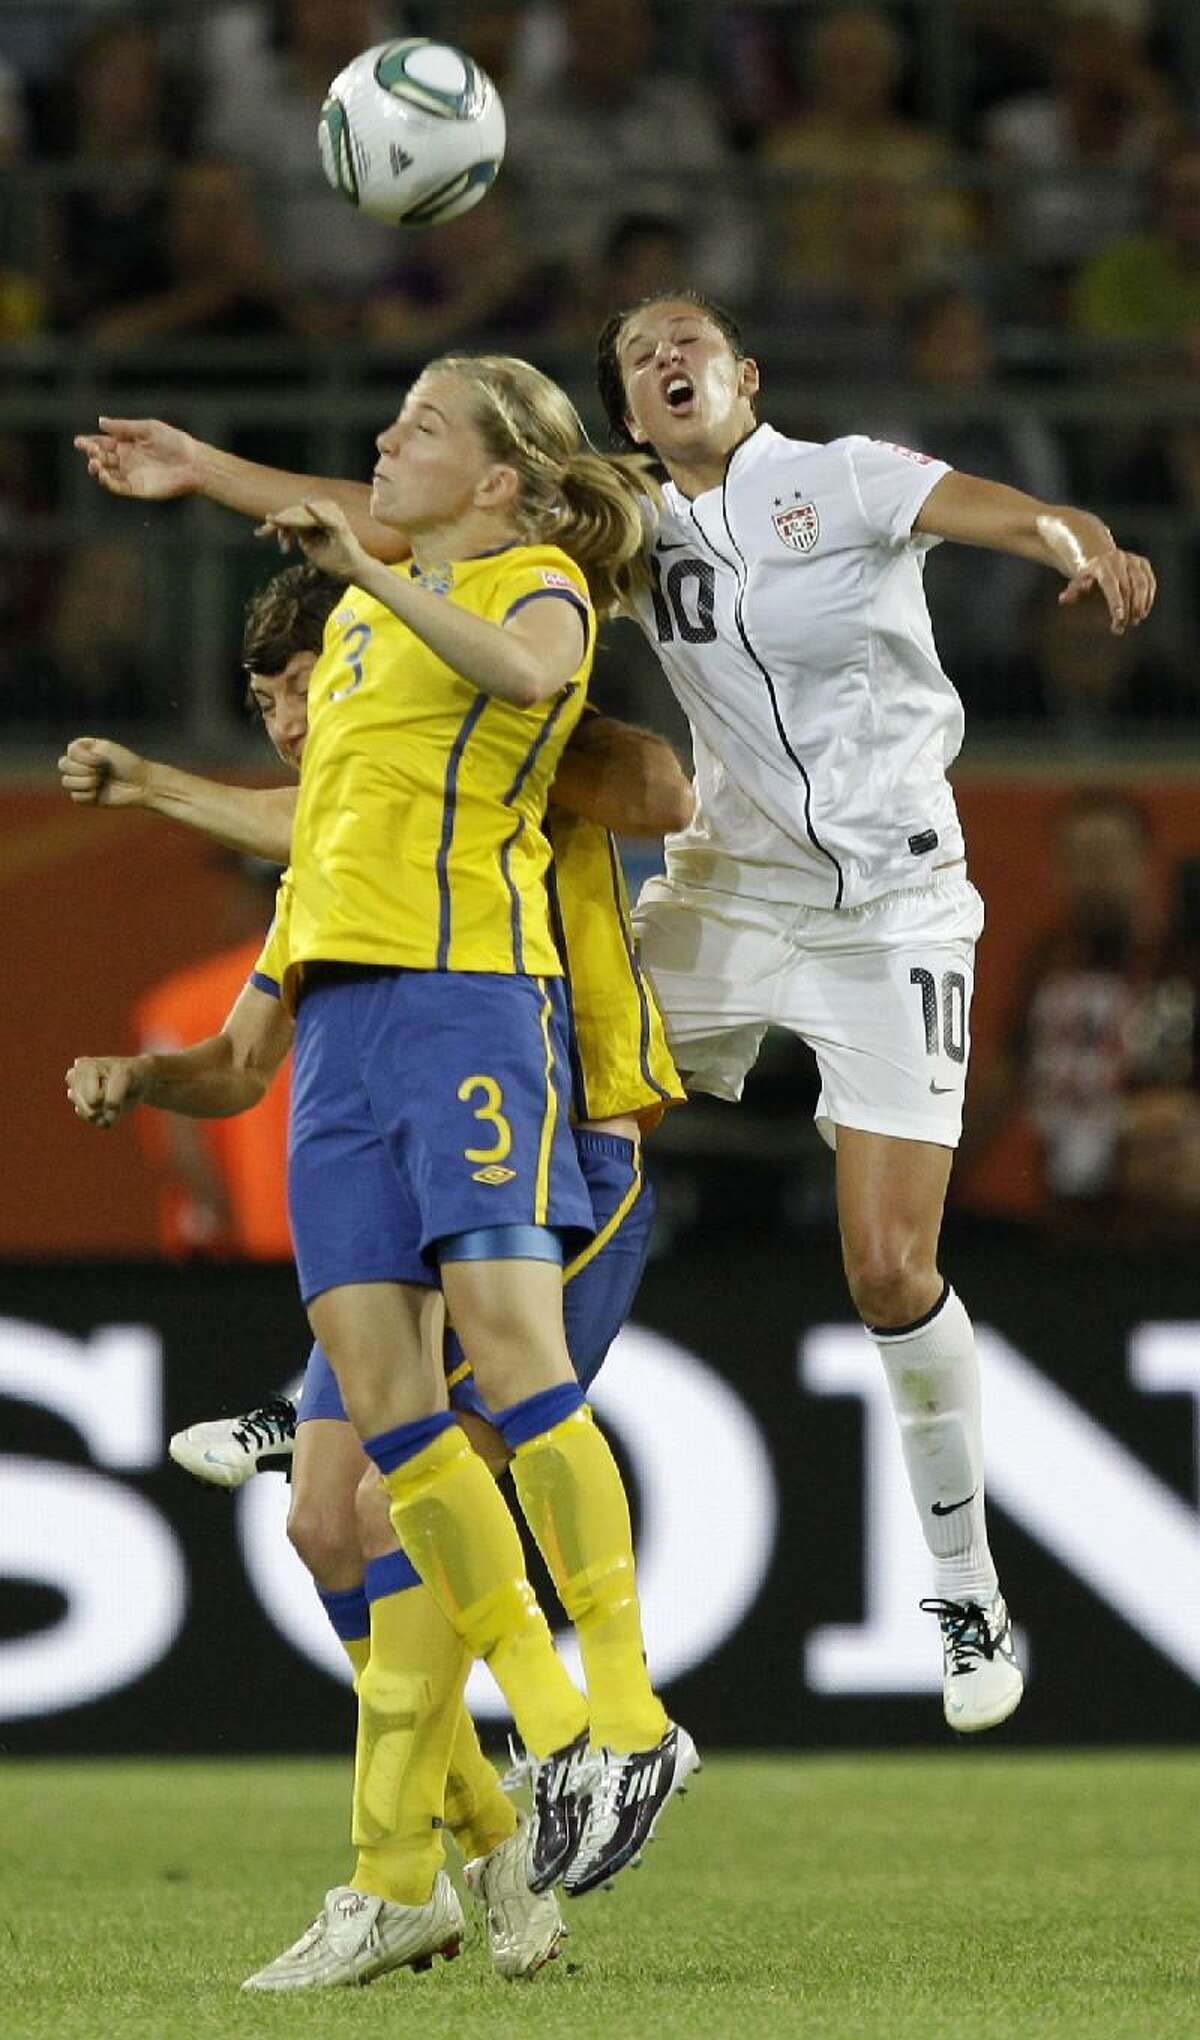 ASSOCIATED PRESS Sweden's Linda Sembrant, left, and United States' Carli Lloyd challenge for the ball during the group C match between Sweden and the United States at the Women's Soccer World Cup in Wolfsburg, Germany, Wednesday. Sweden won 2-1.